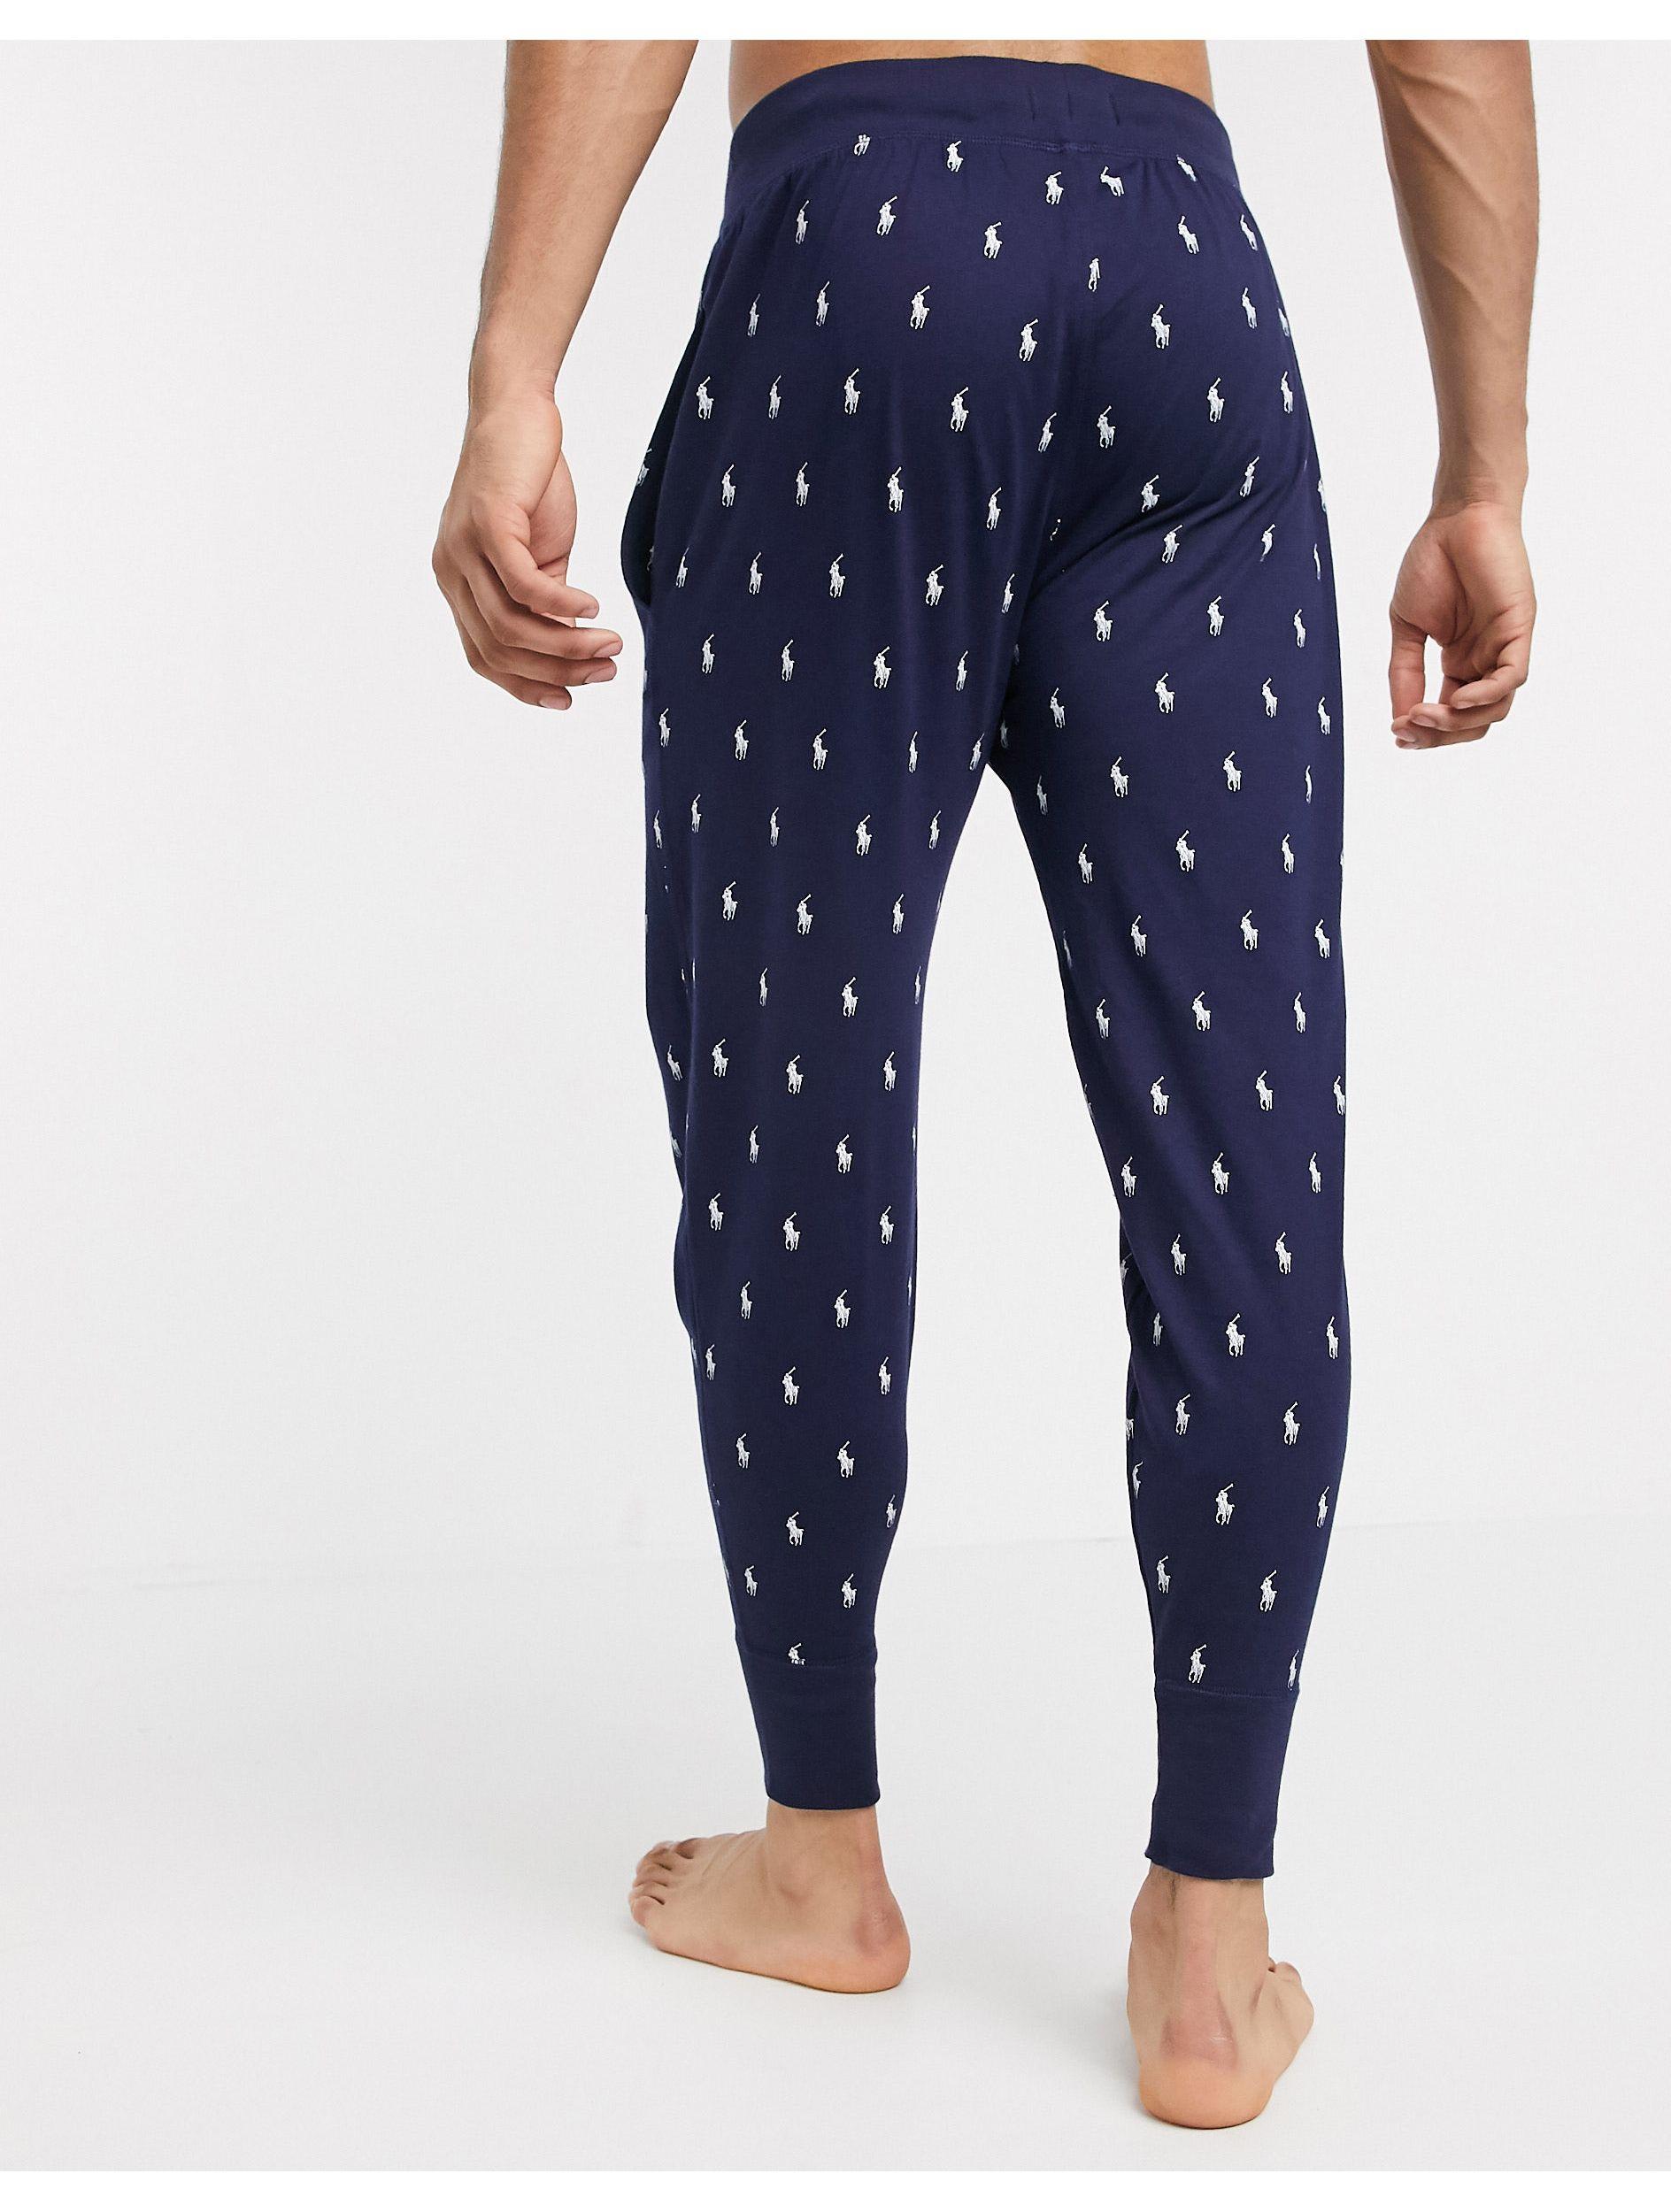 Polo Ralph Lauren Cotton Pony Print Pajama Jogger Pants in Navy (Blue) for  Men - Save 55% | Lyst